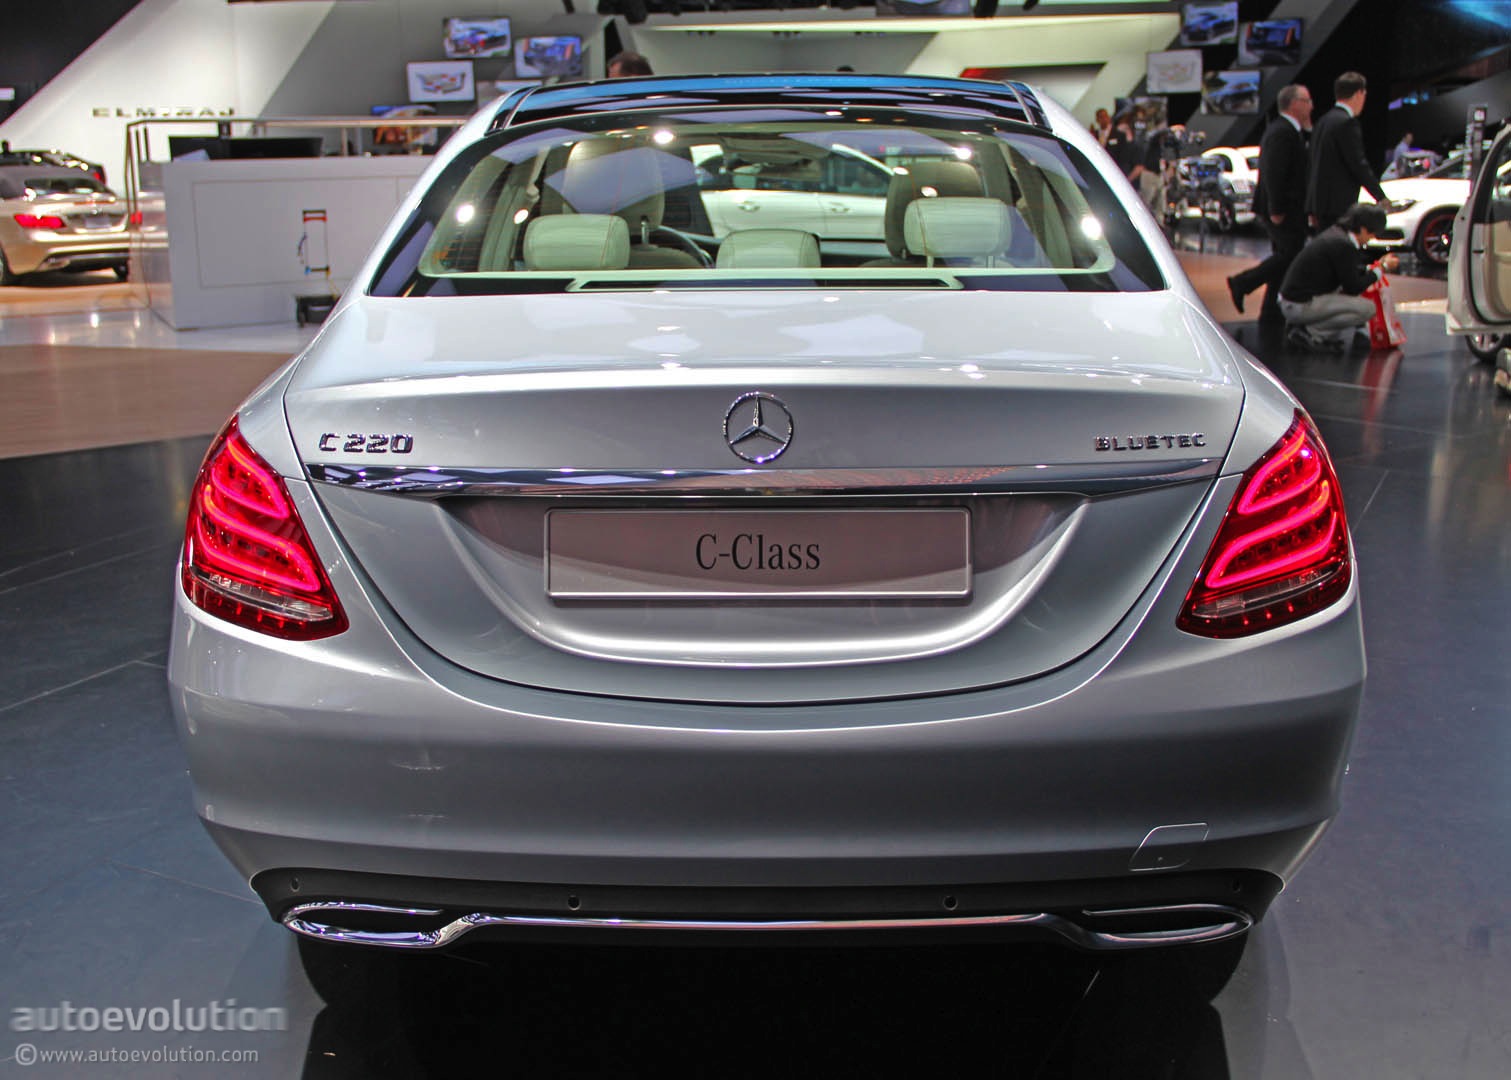 2015 Mercedes C-Class Takes a Luxury Lead in Detroit [Live Photos